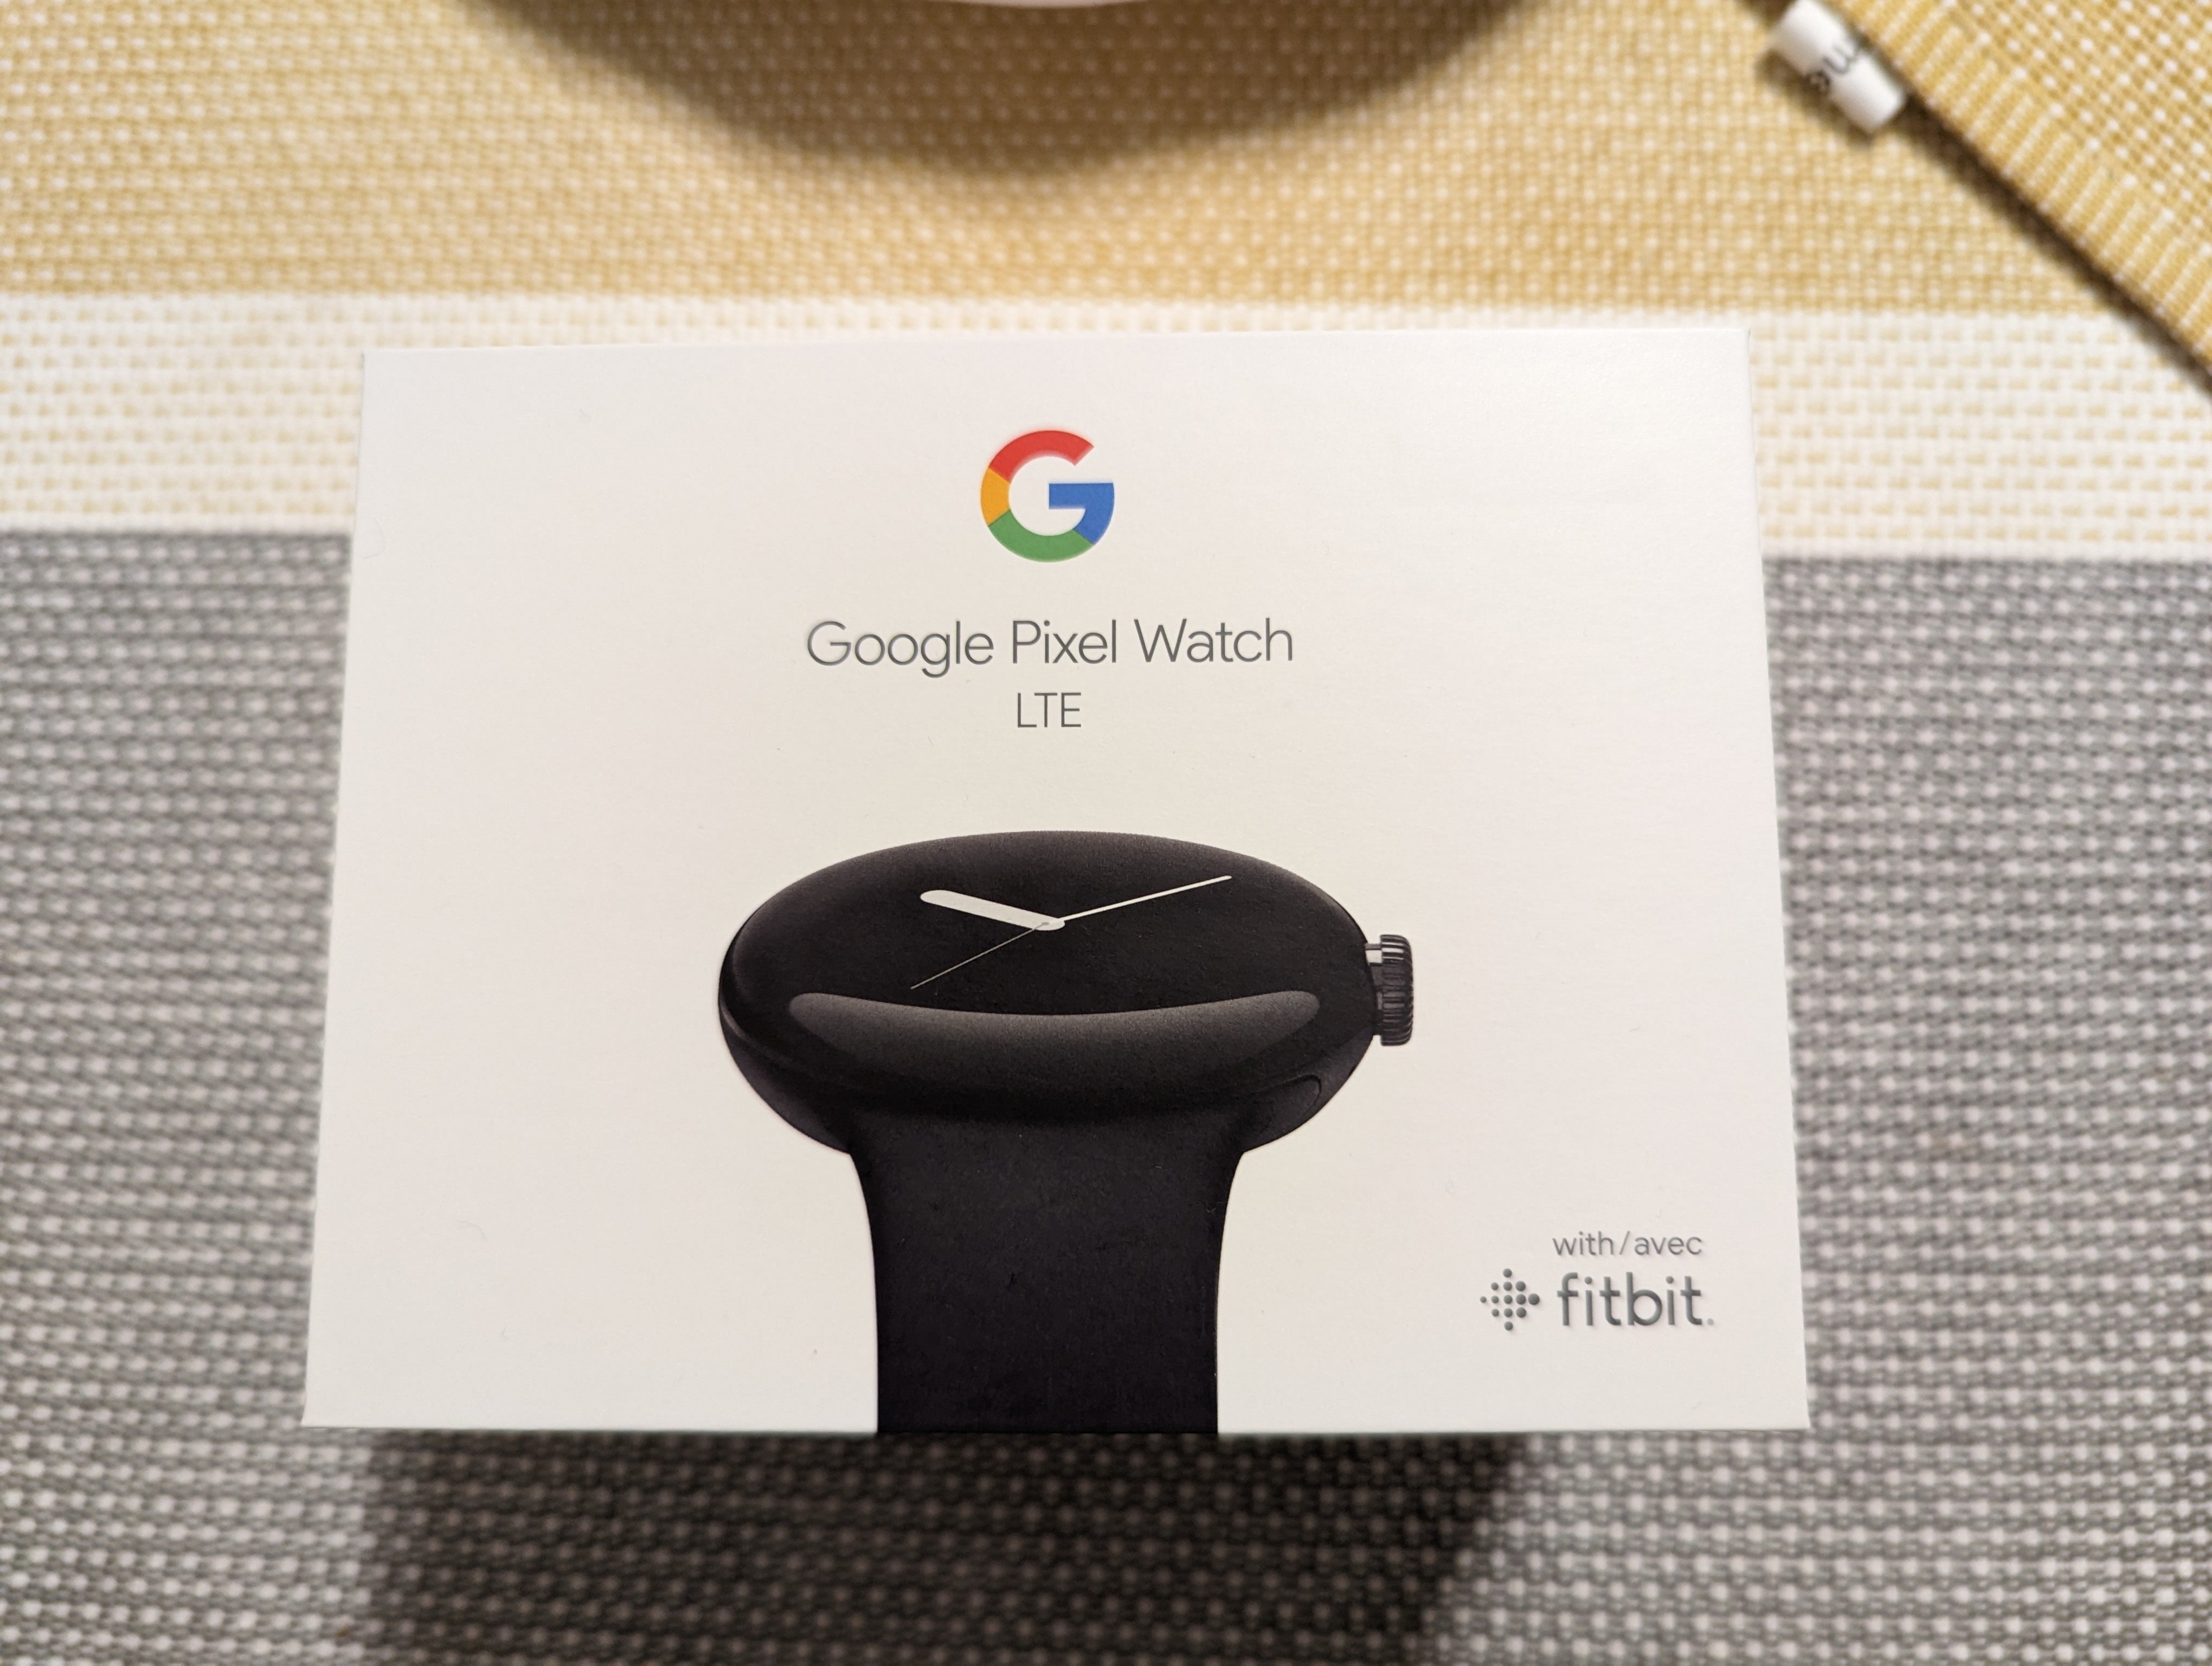 More information about "Google Pixel Watch LTE black"